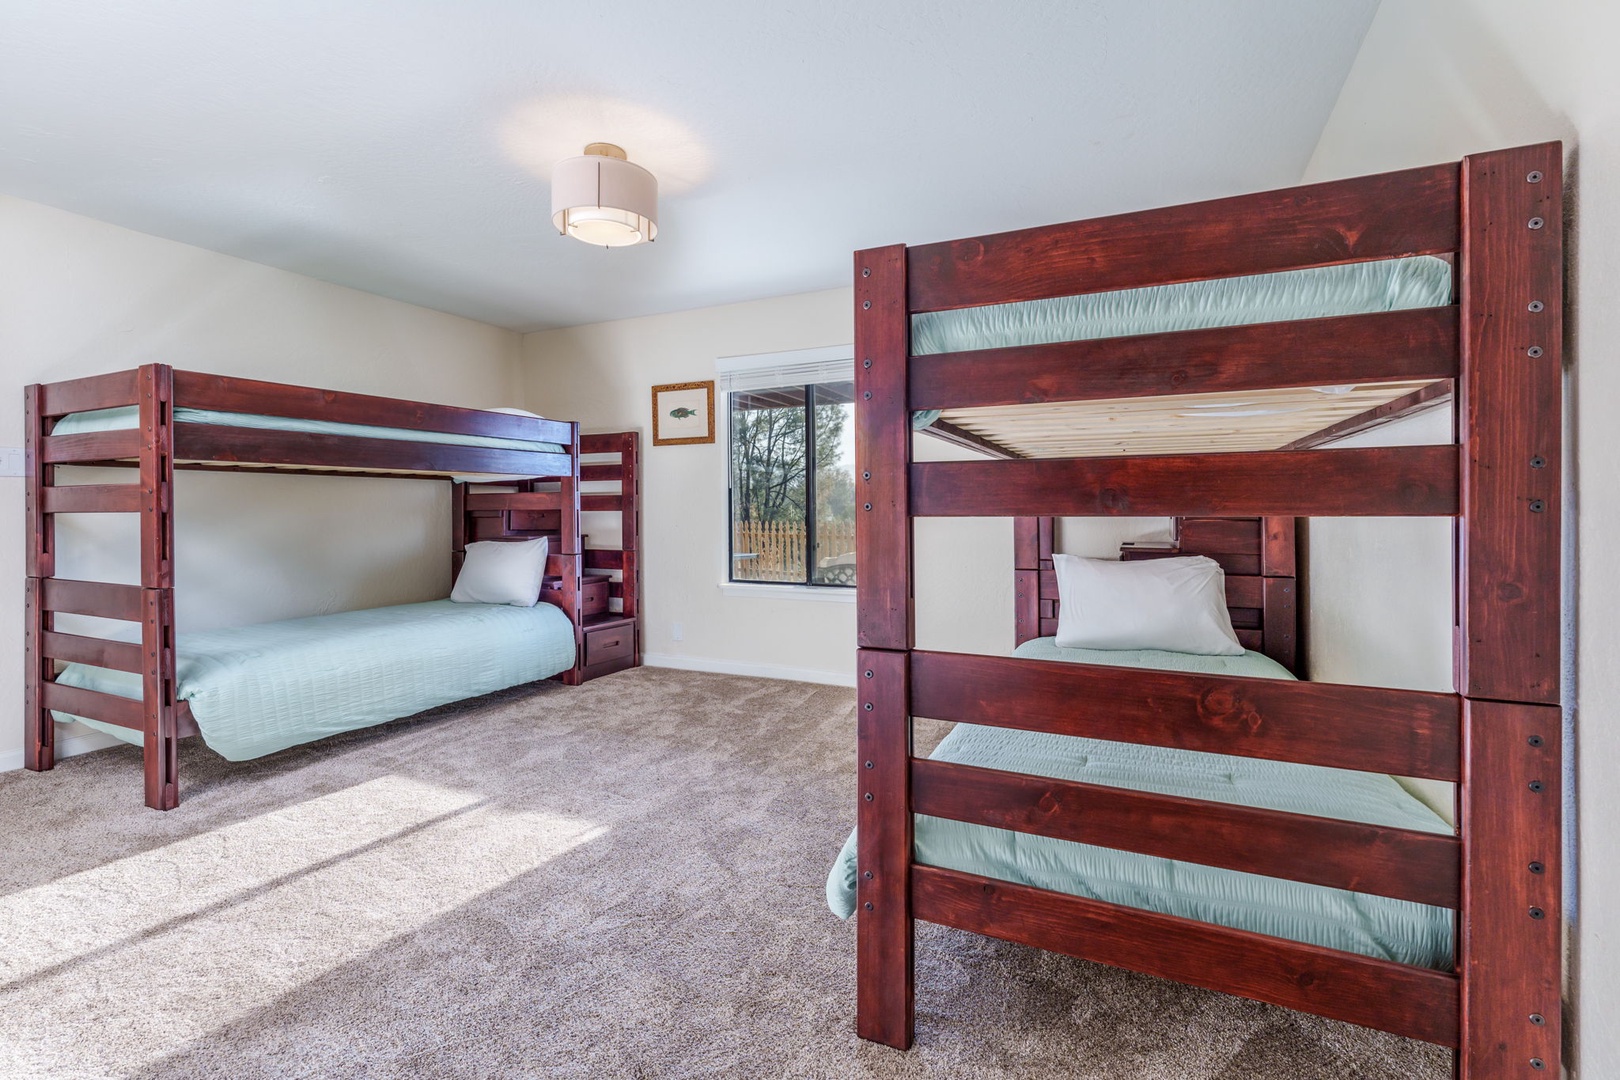 The Lower-Level Bunk Room offers two Twin-Over-Twin Bunkbeds and lots of natural light